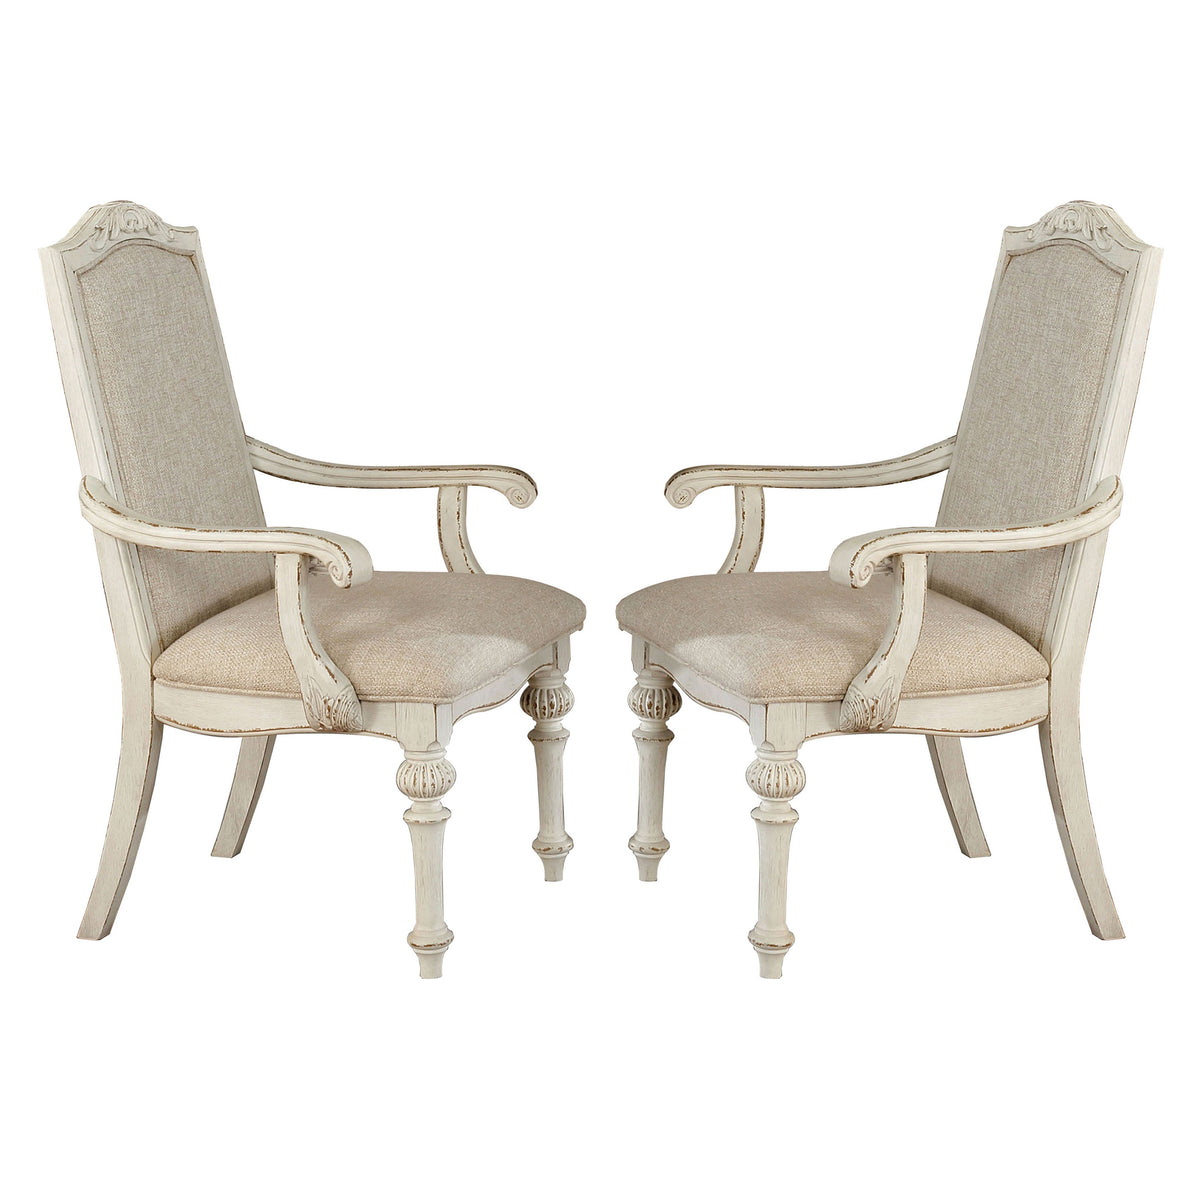 Rustic Wooden Arm Chair with Intricate Carvings, Set of 2, Antique White - BM235431